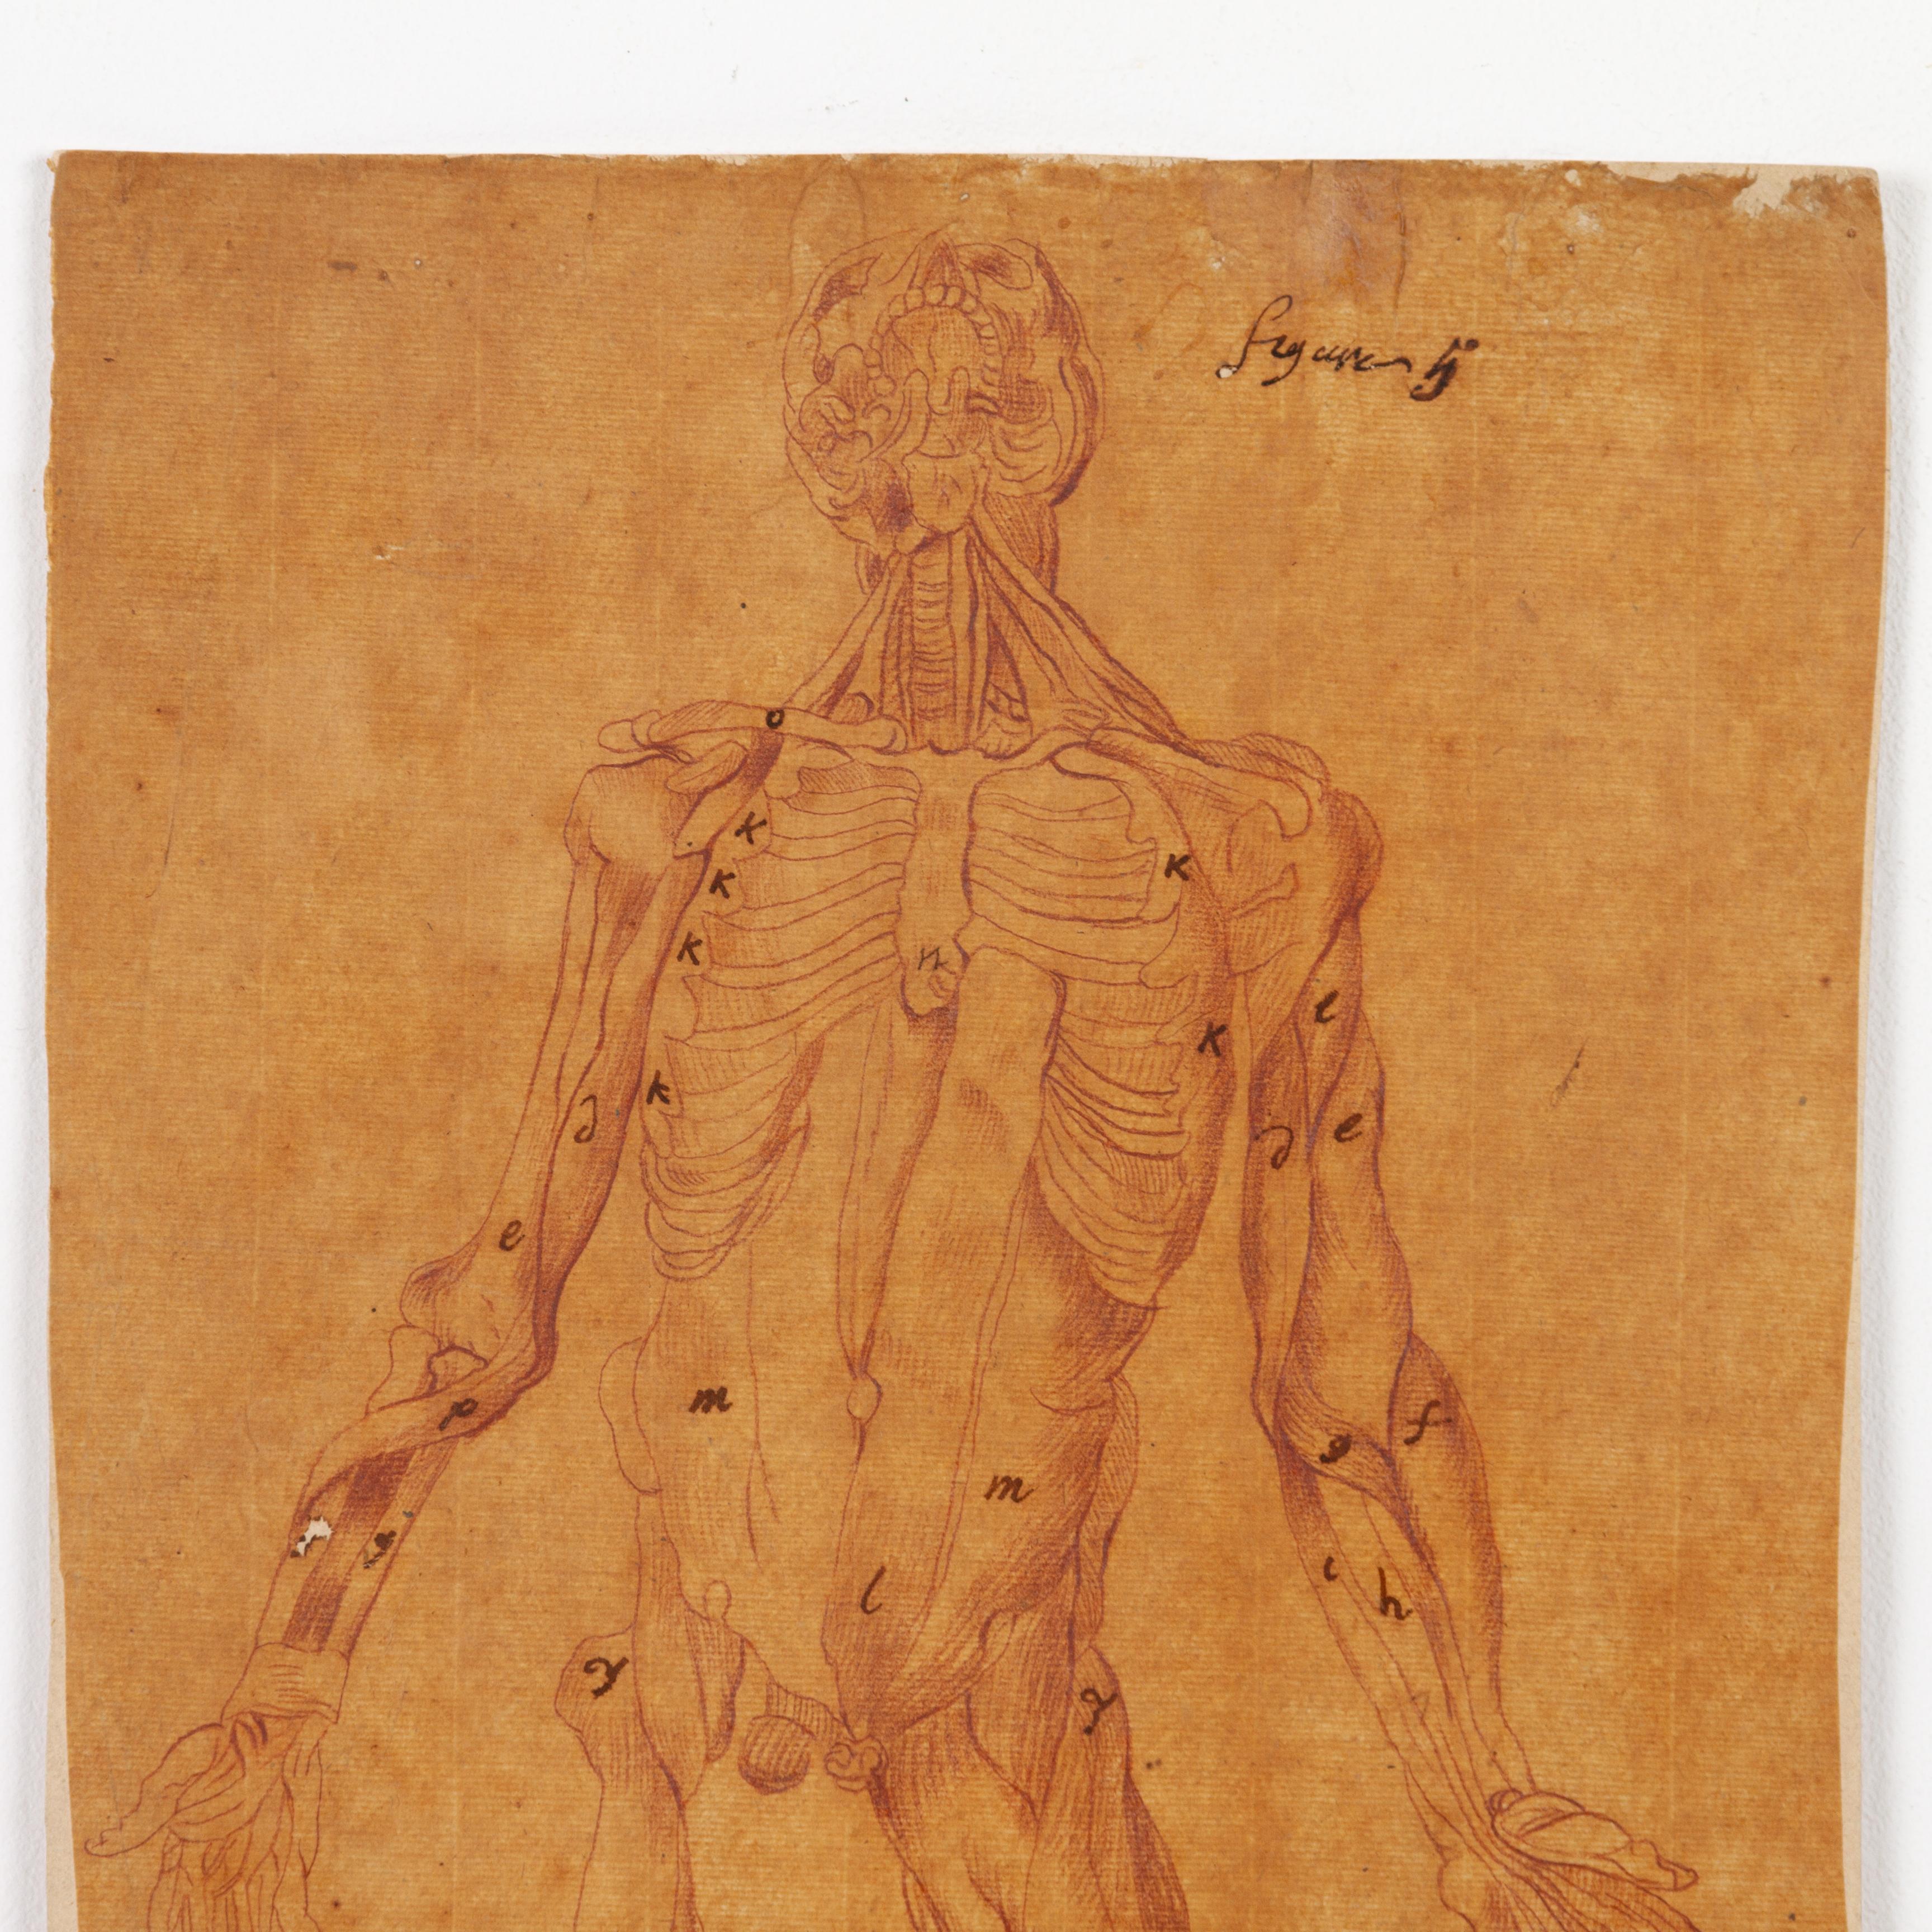 In good condition
From a private collection
Free international shipping
17th Century Old Master Anatomical Skeleton Drawing on Laid Paper
